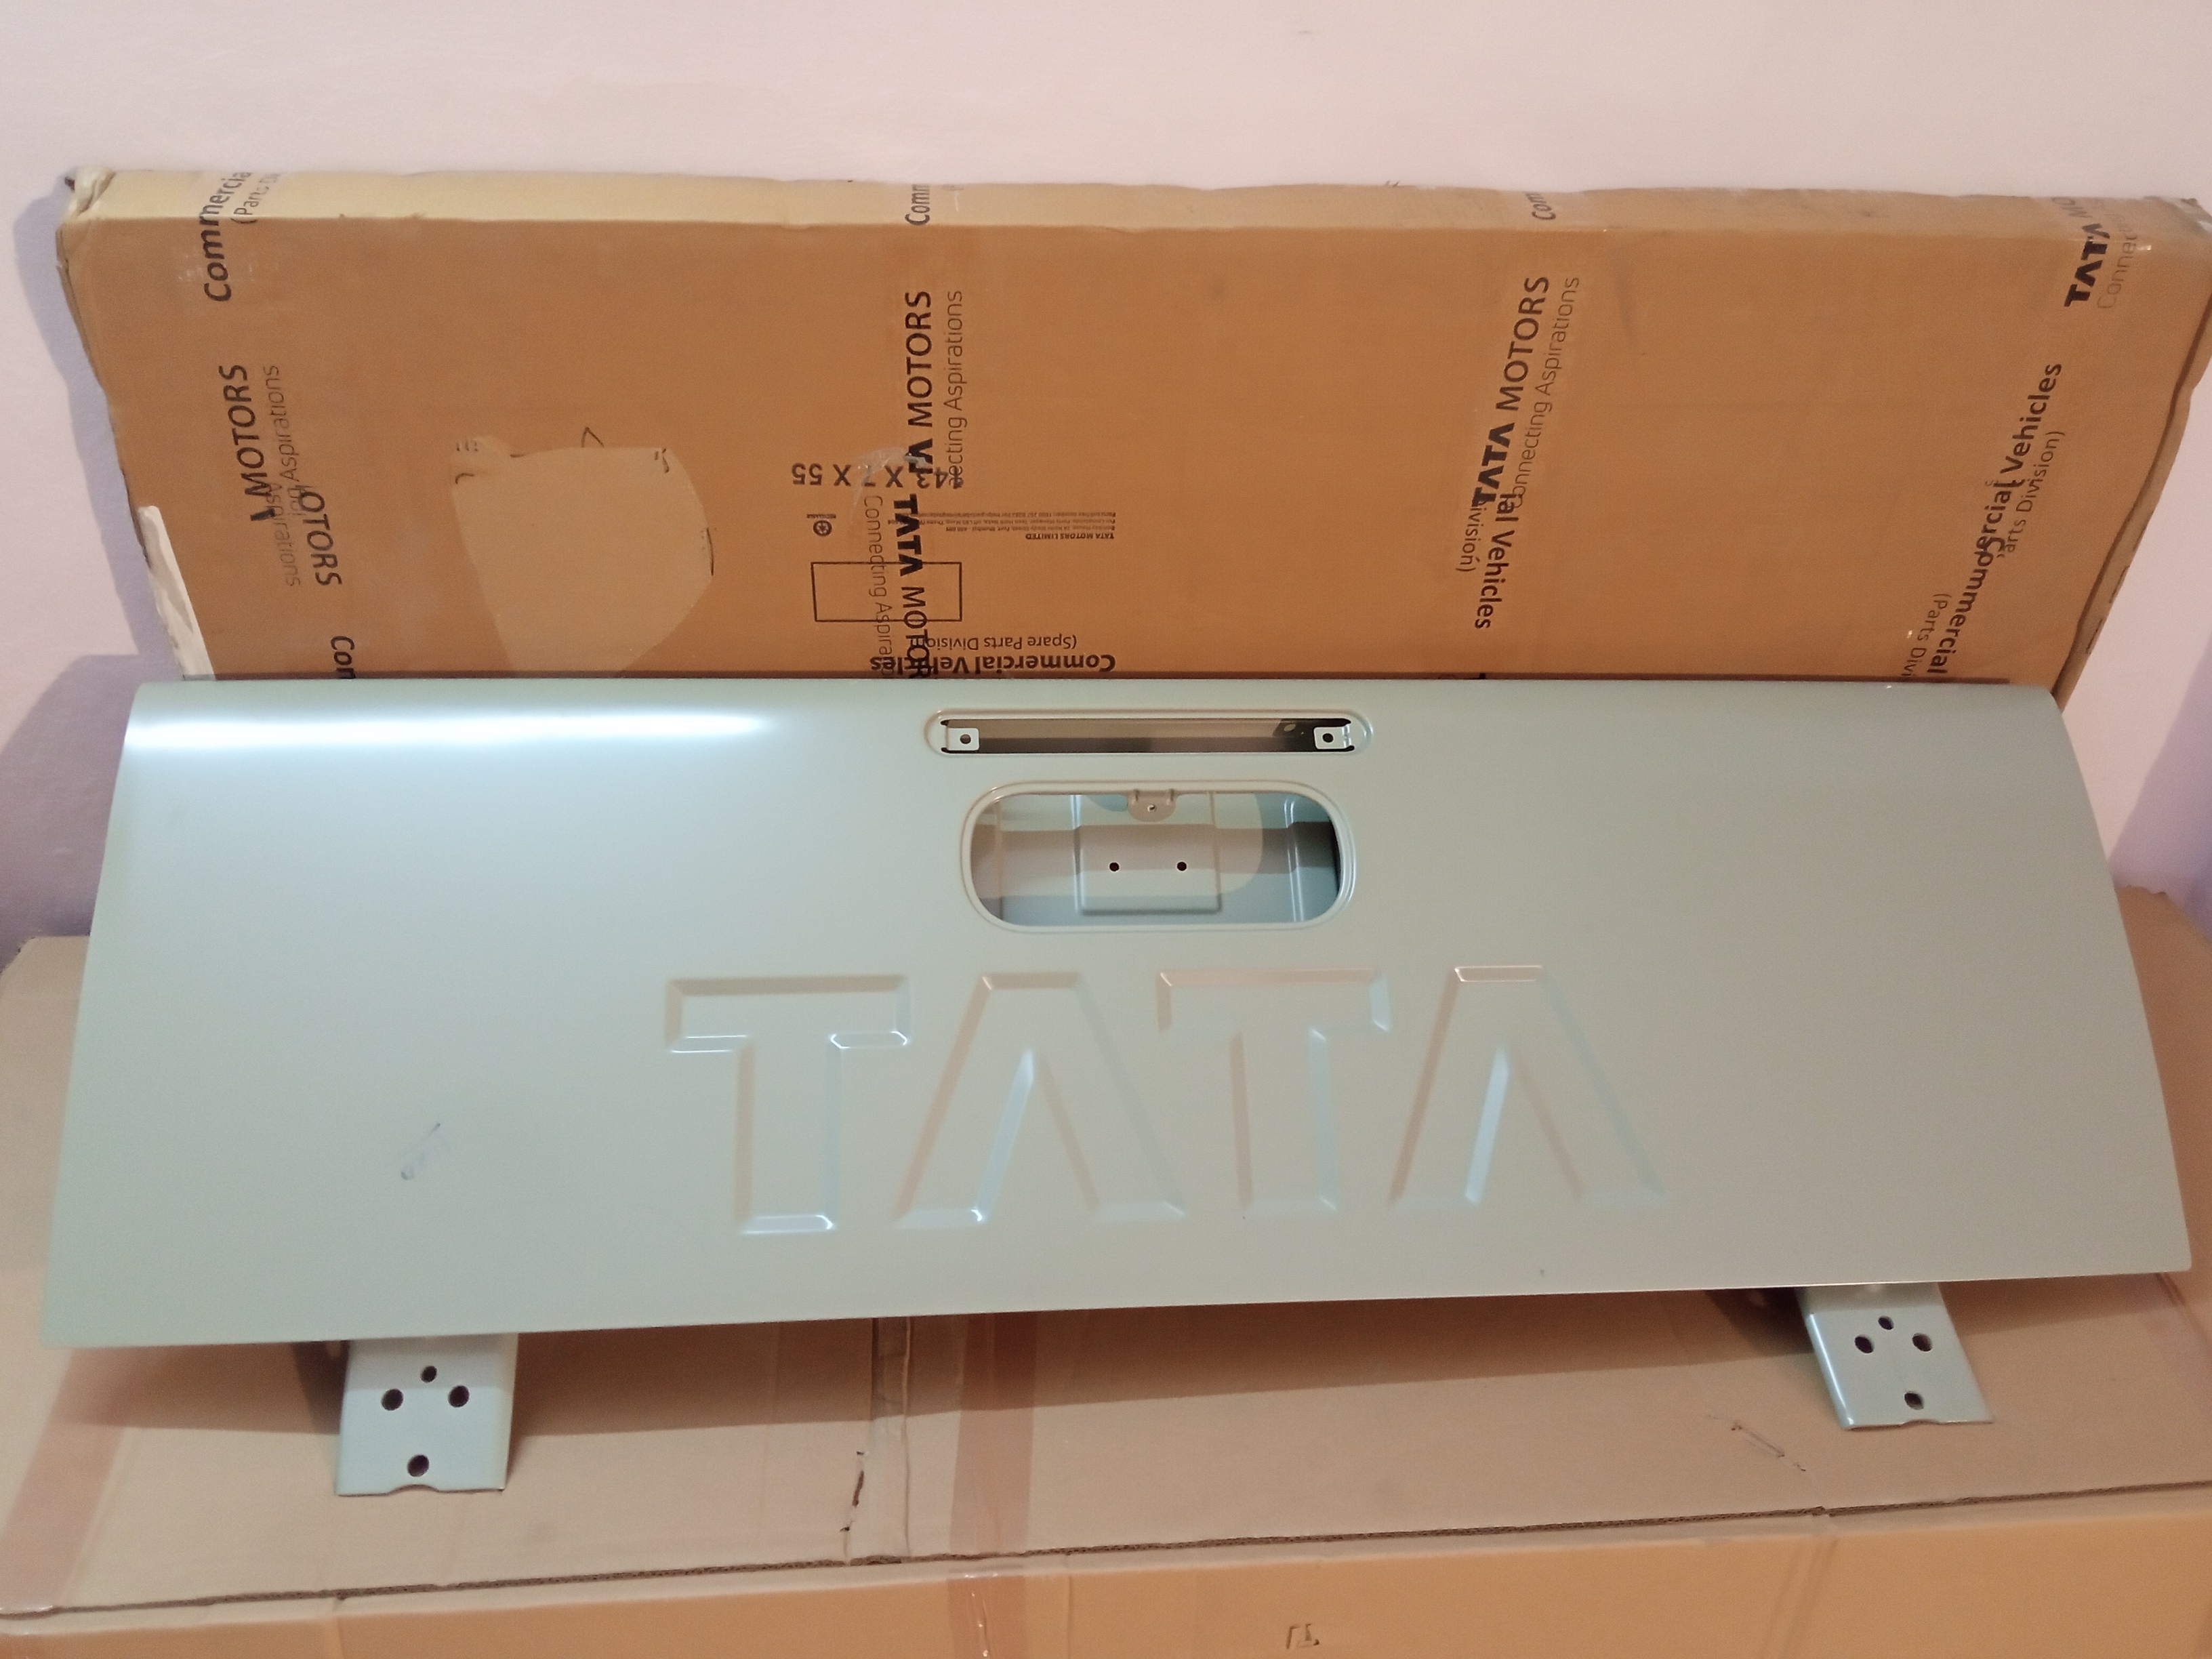 TATA XENON 2.2 ASSY TAILGATE WITH HINGES 289470400108 STOCKID 1747